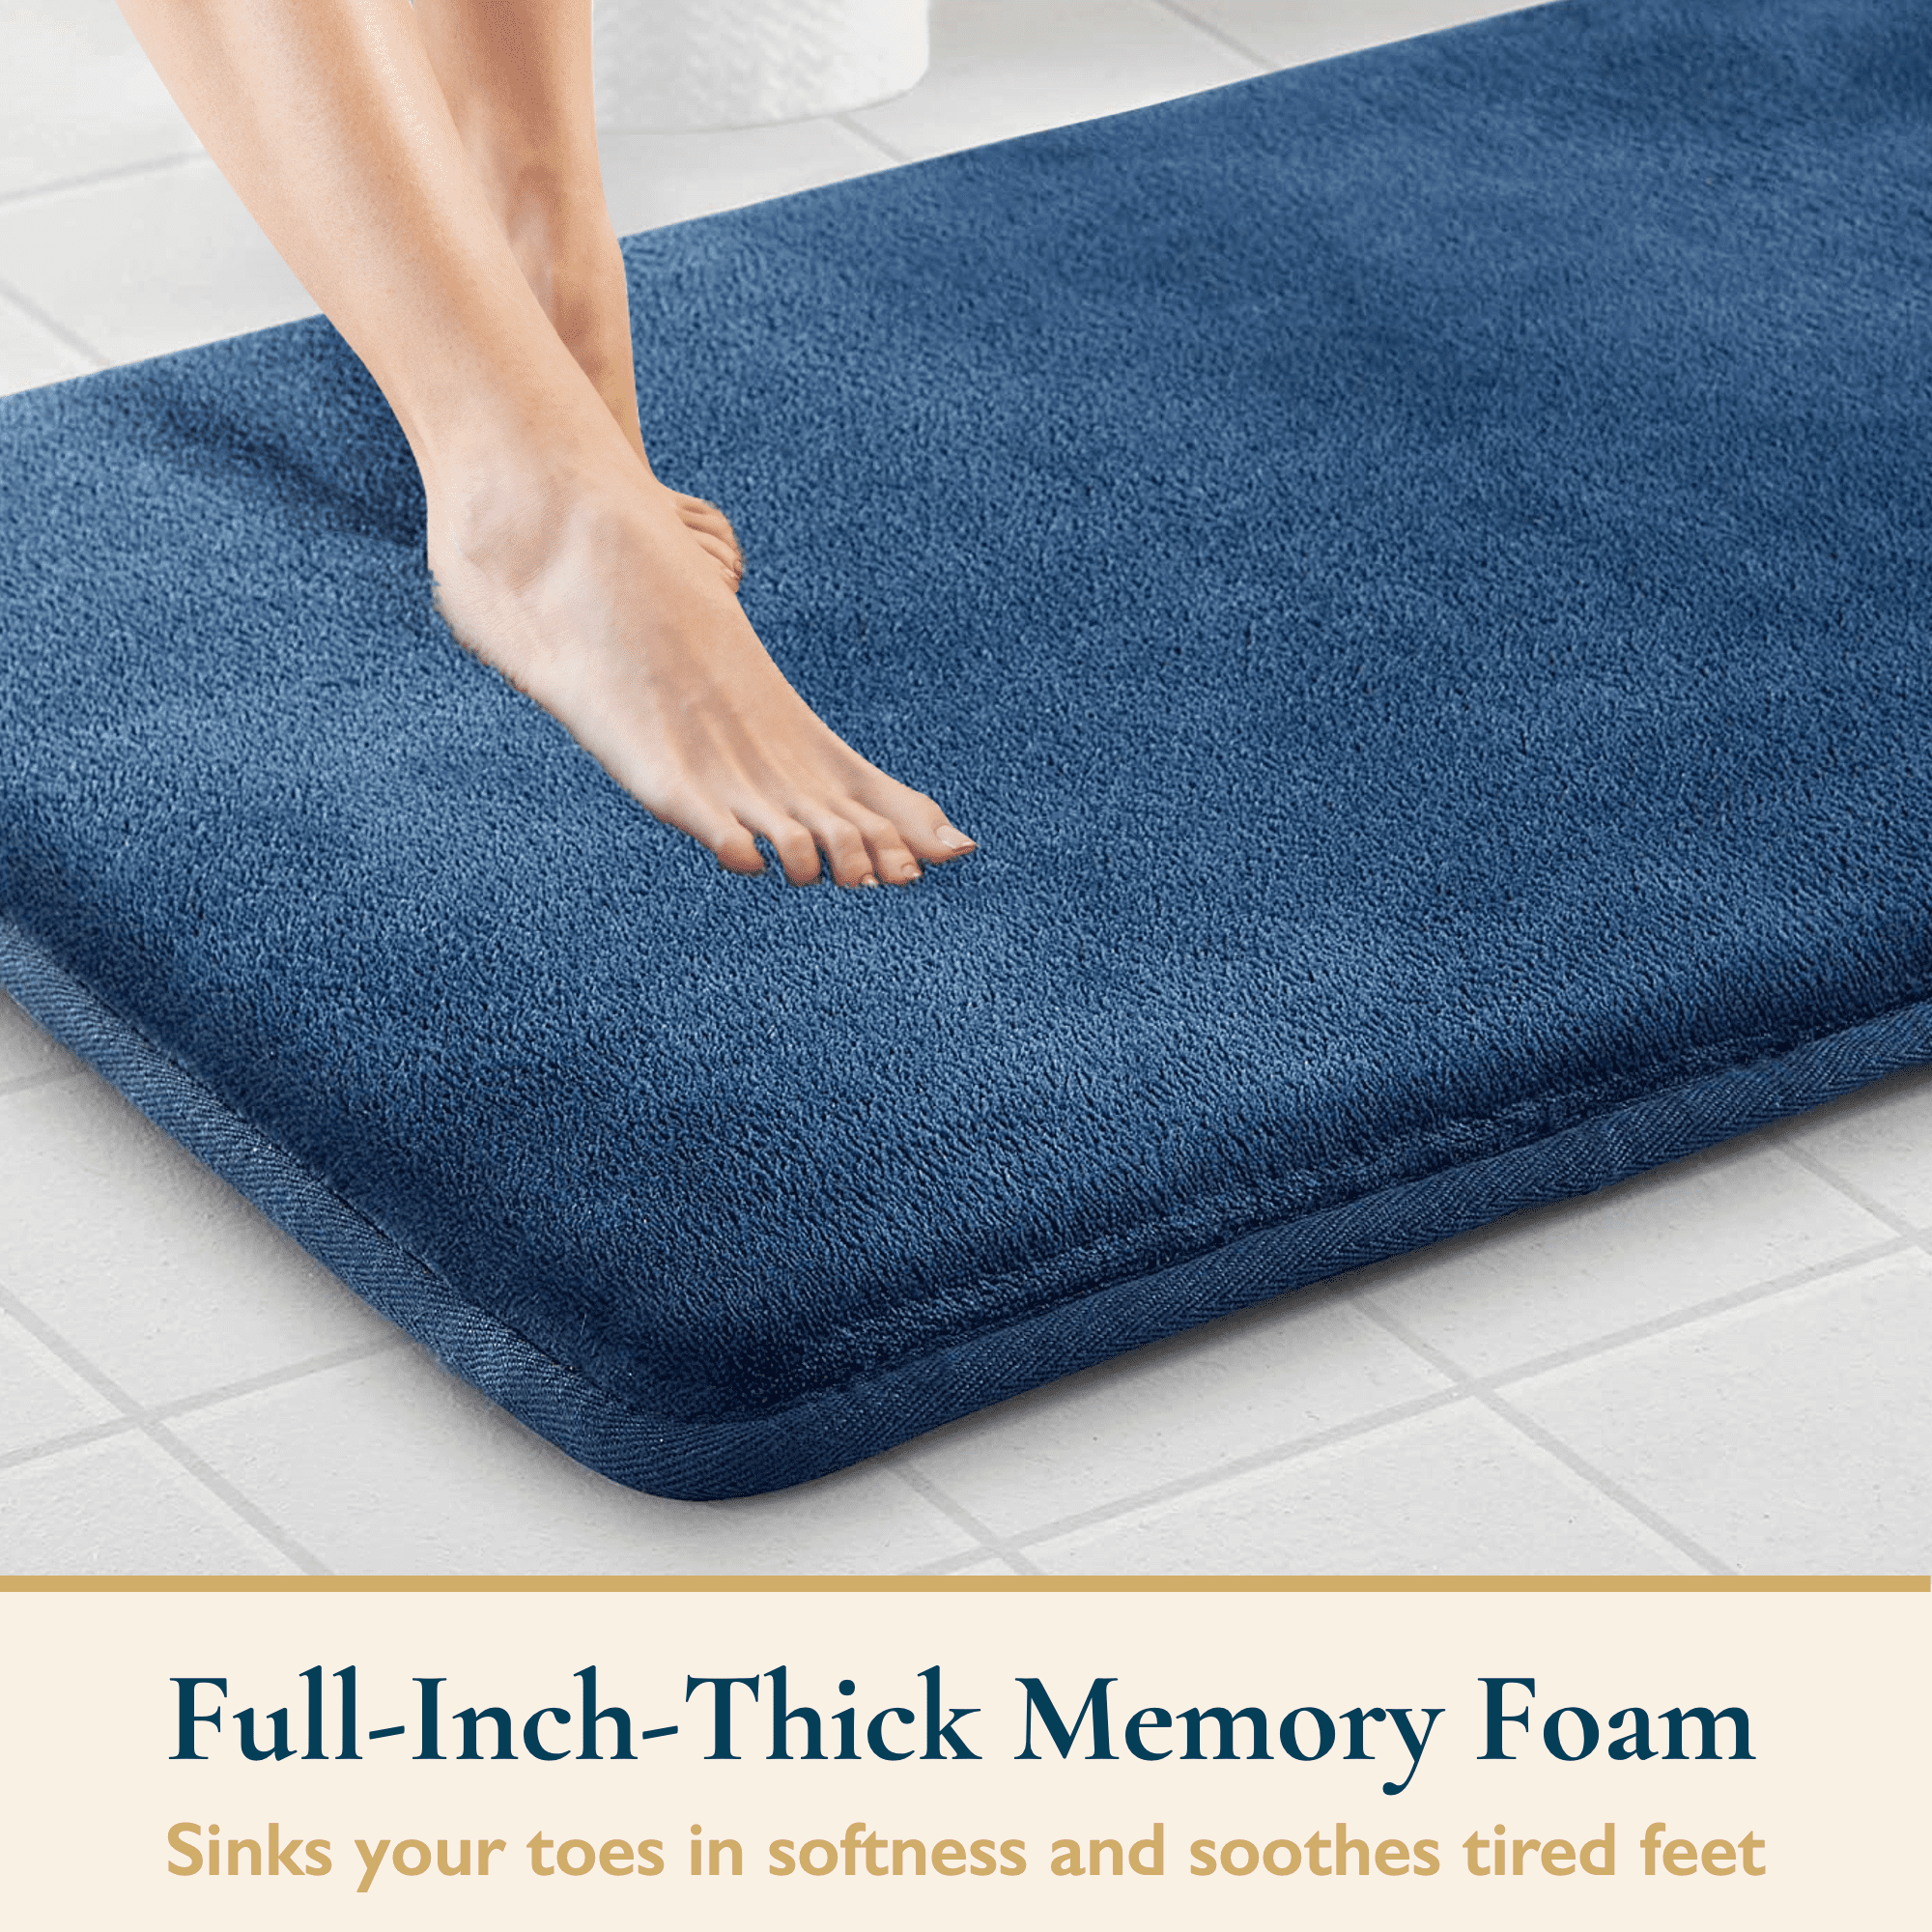 OLANLY Memory Foam Bath Mat Rug 47x24, Large Size Ultra Soft Non Slip and  Absorbent Bathroom Rug, Machine Wash Dry, Comfortable, Thick Bath Rug  Carpet